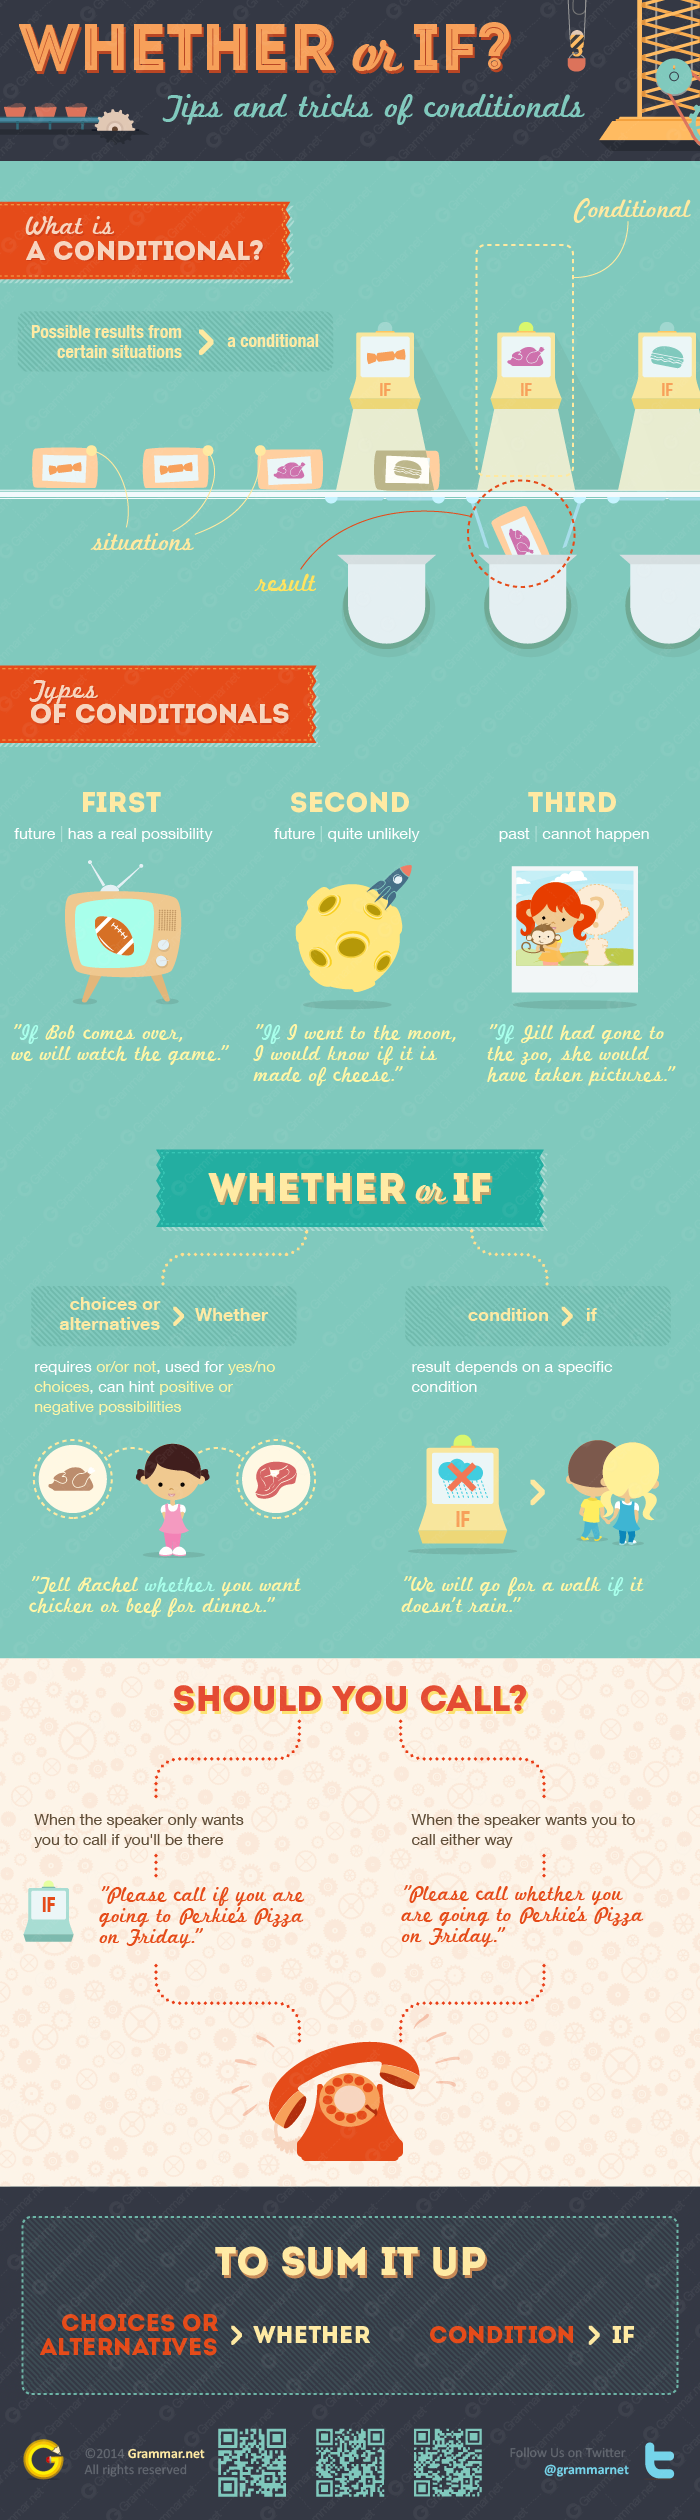 whether if - infographic_small-01-2